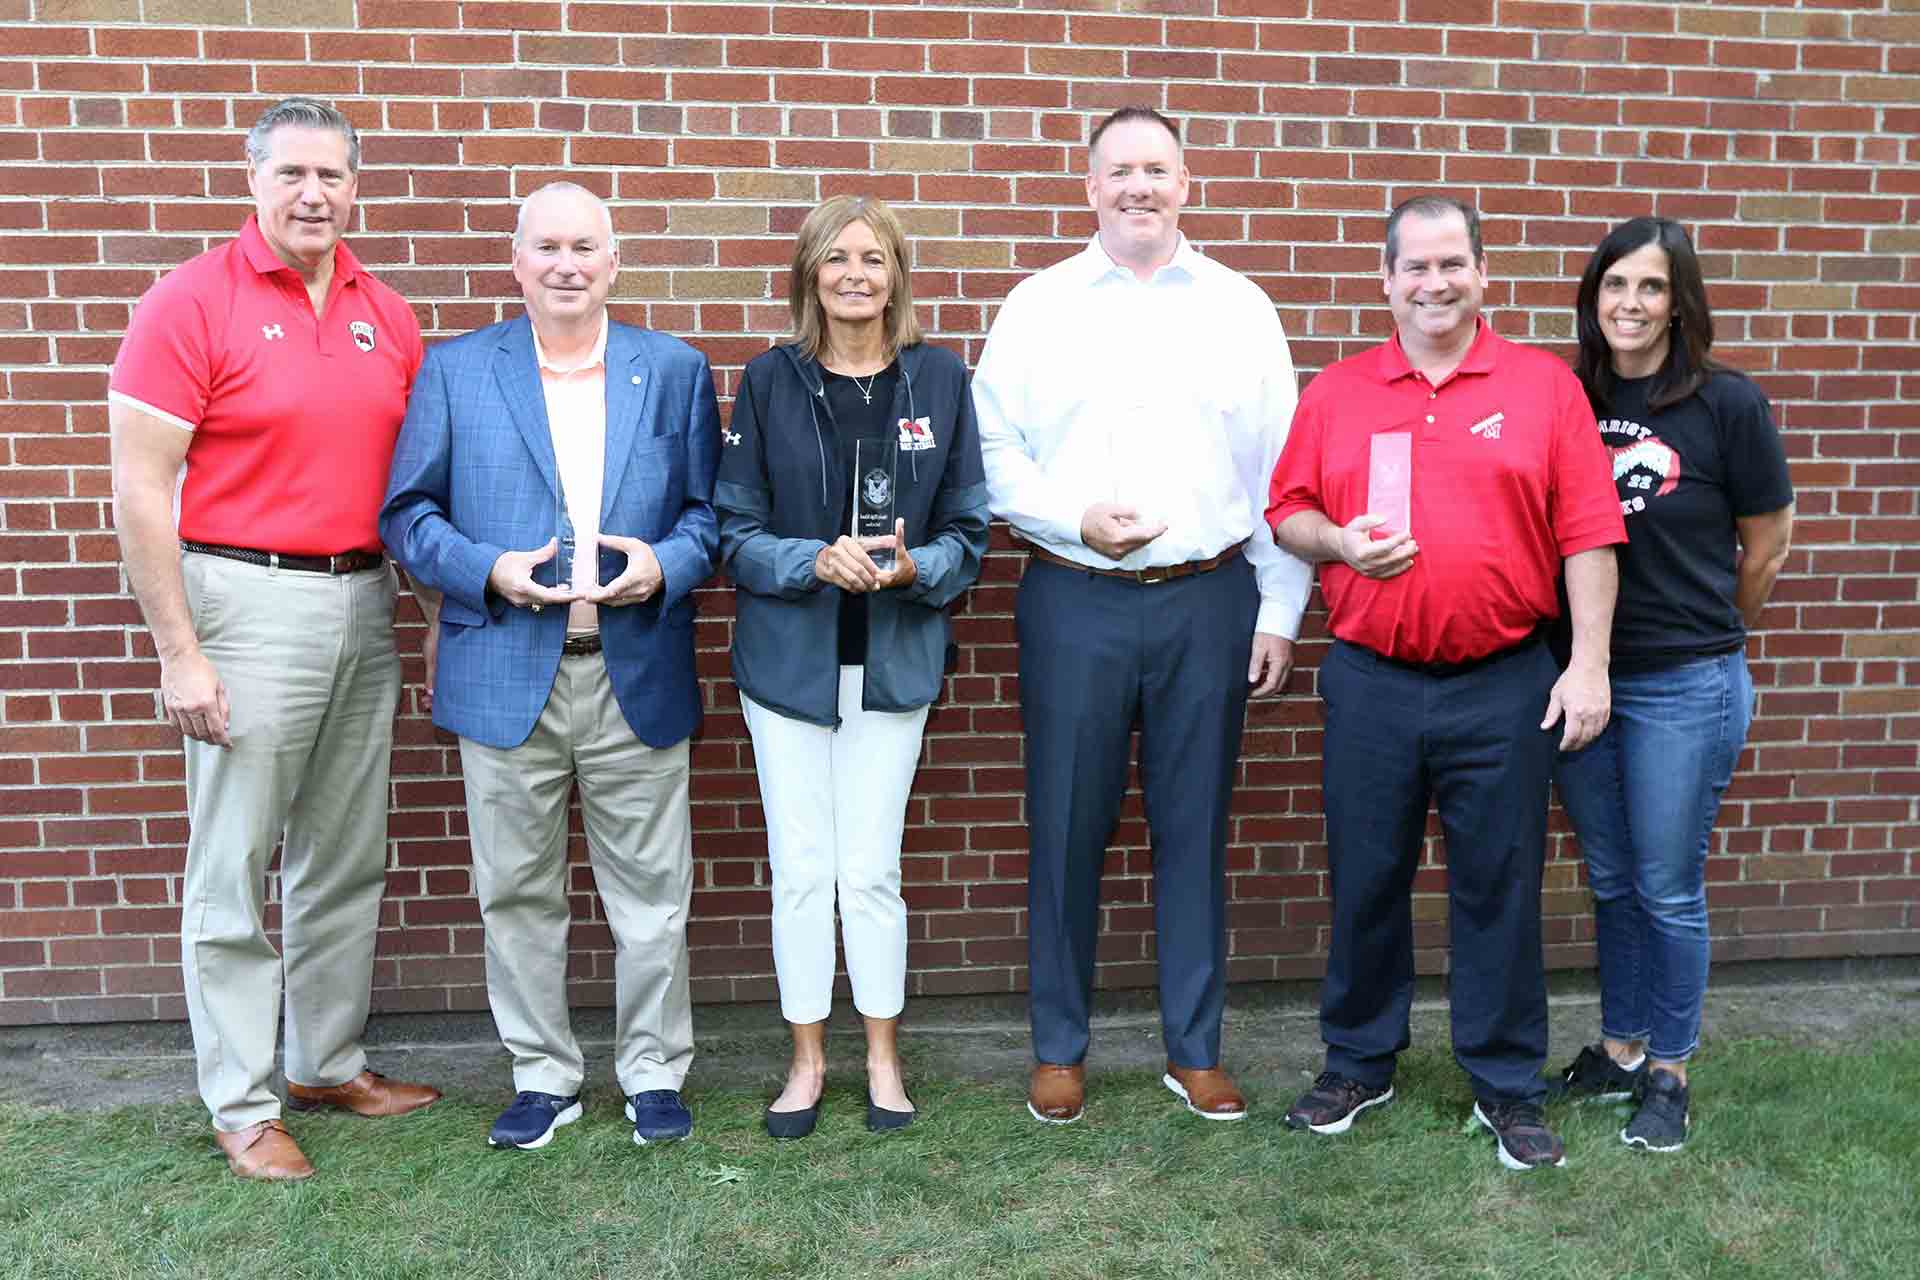 2021-hall-of-fame-ceremony-group-photo-of-honorees